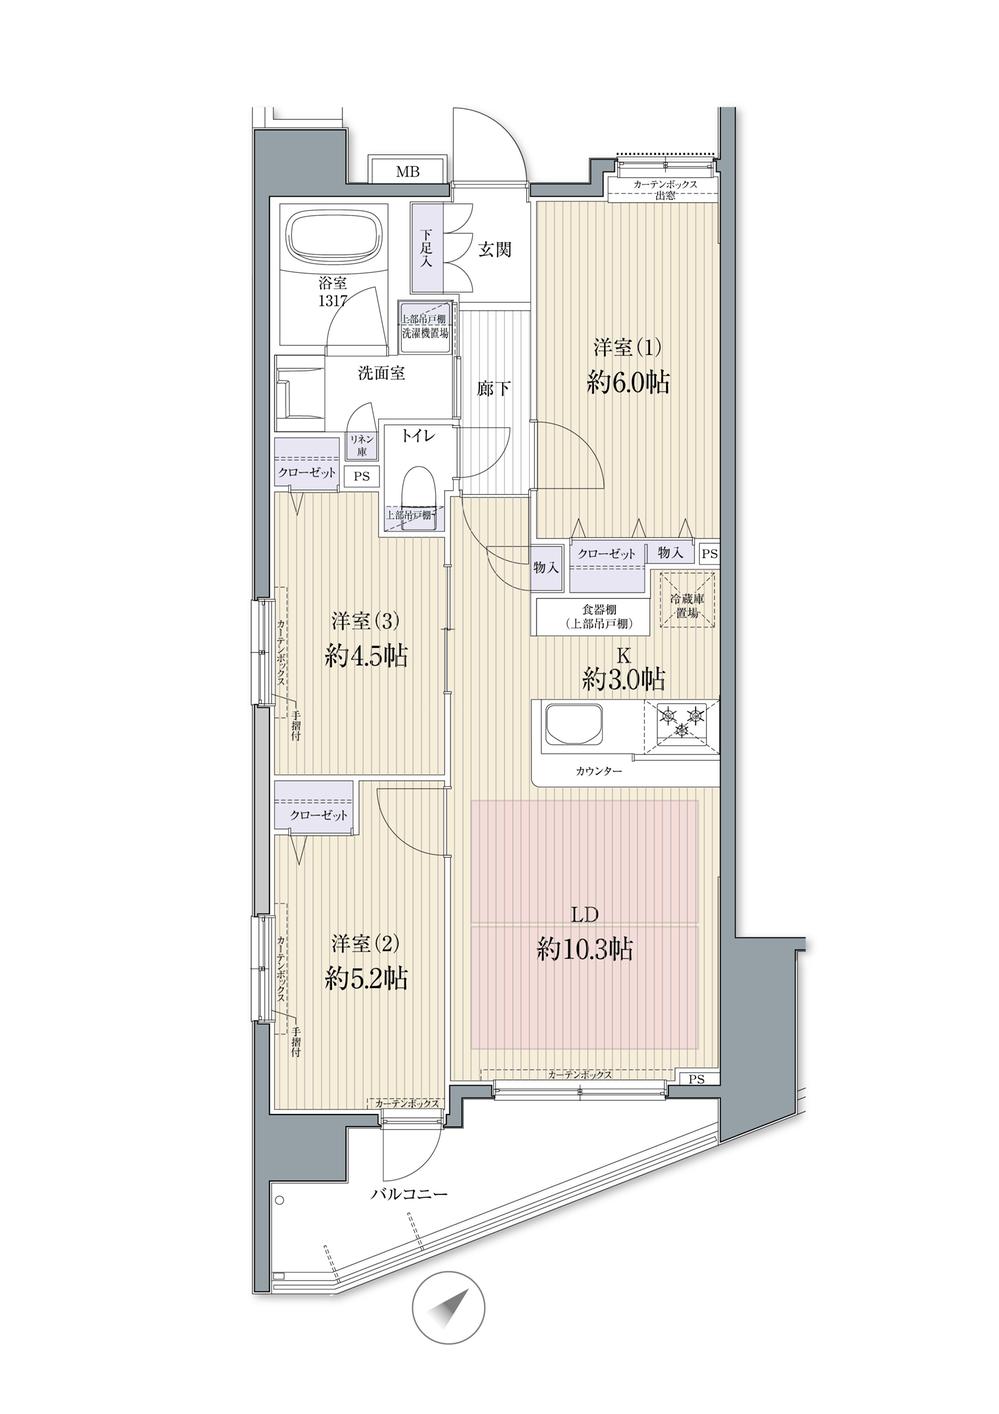 Floor plan. 3LDK, Price 36,800,000 yen, Occupied area 61.46 sq m , Balcony area 7.98 sq m popular counter kitchen, Because of the standard floor plan, Reform will be various thought.